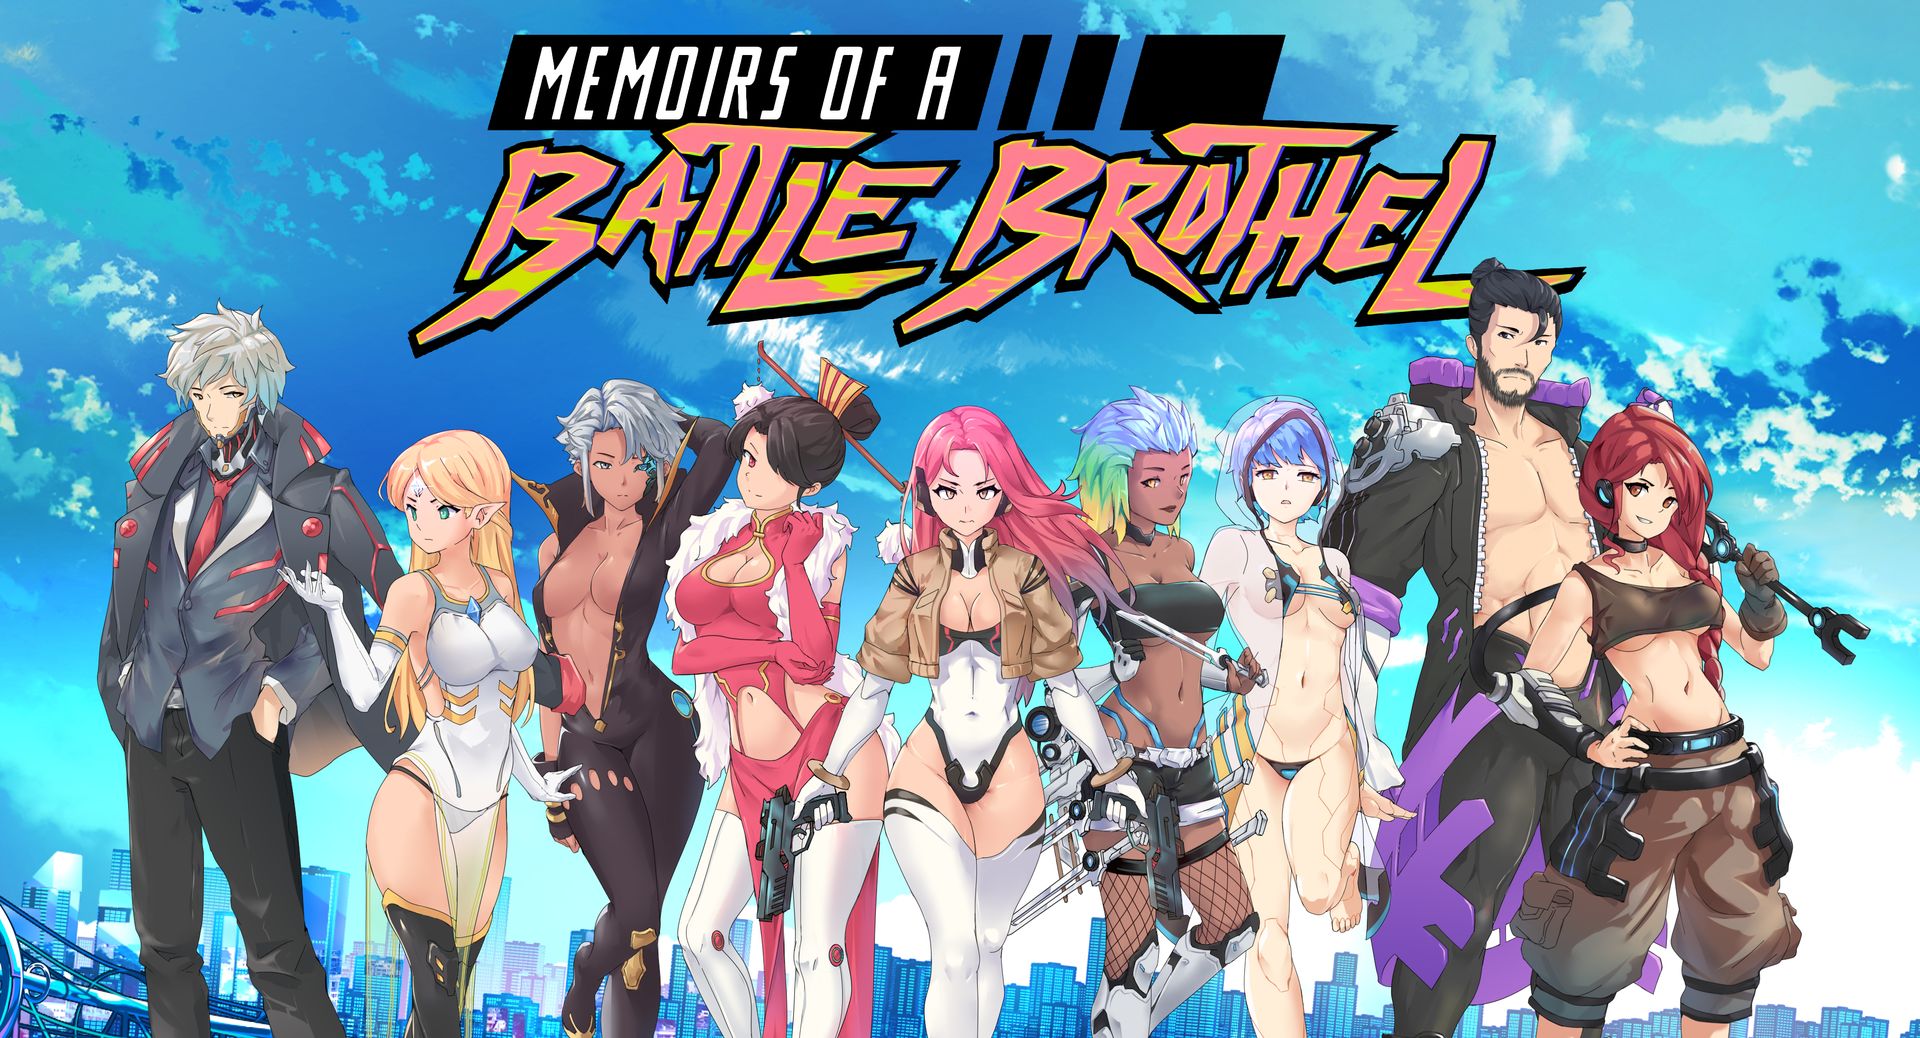 Hentai Battle Force 5 - Download Free Hentai Game Porn Games Memoirs of a Battle Brothel (v1.061)